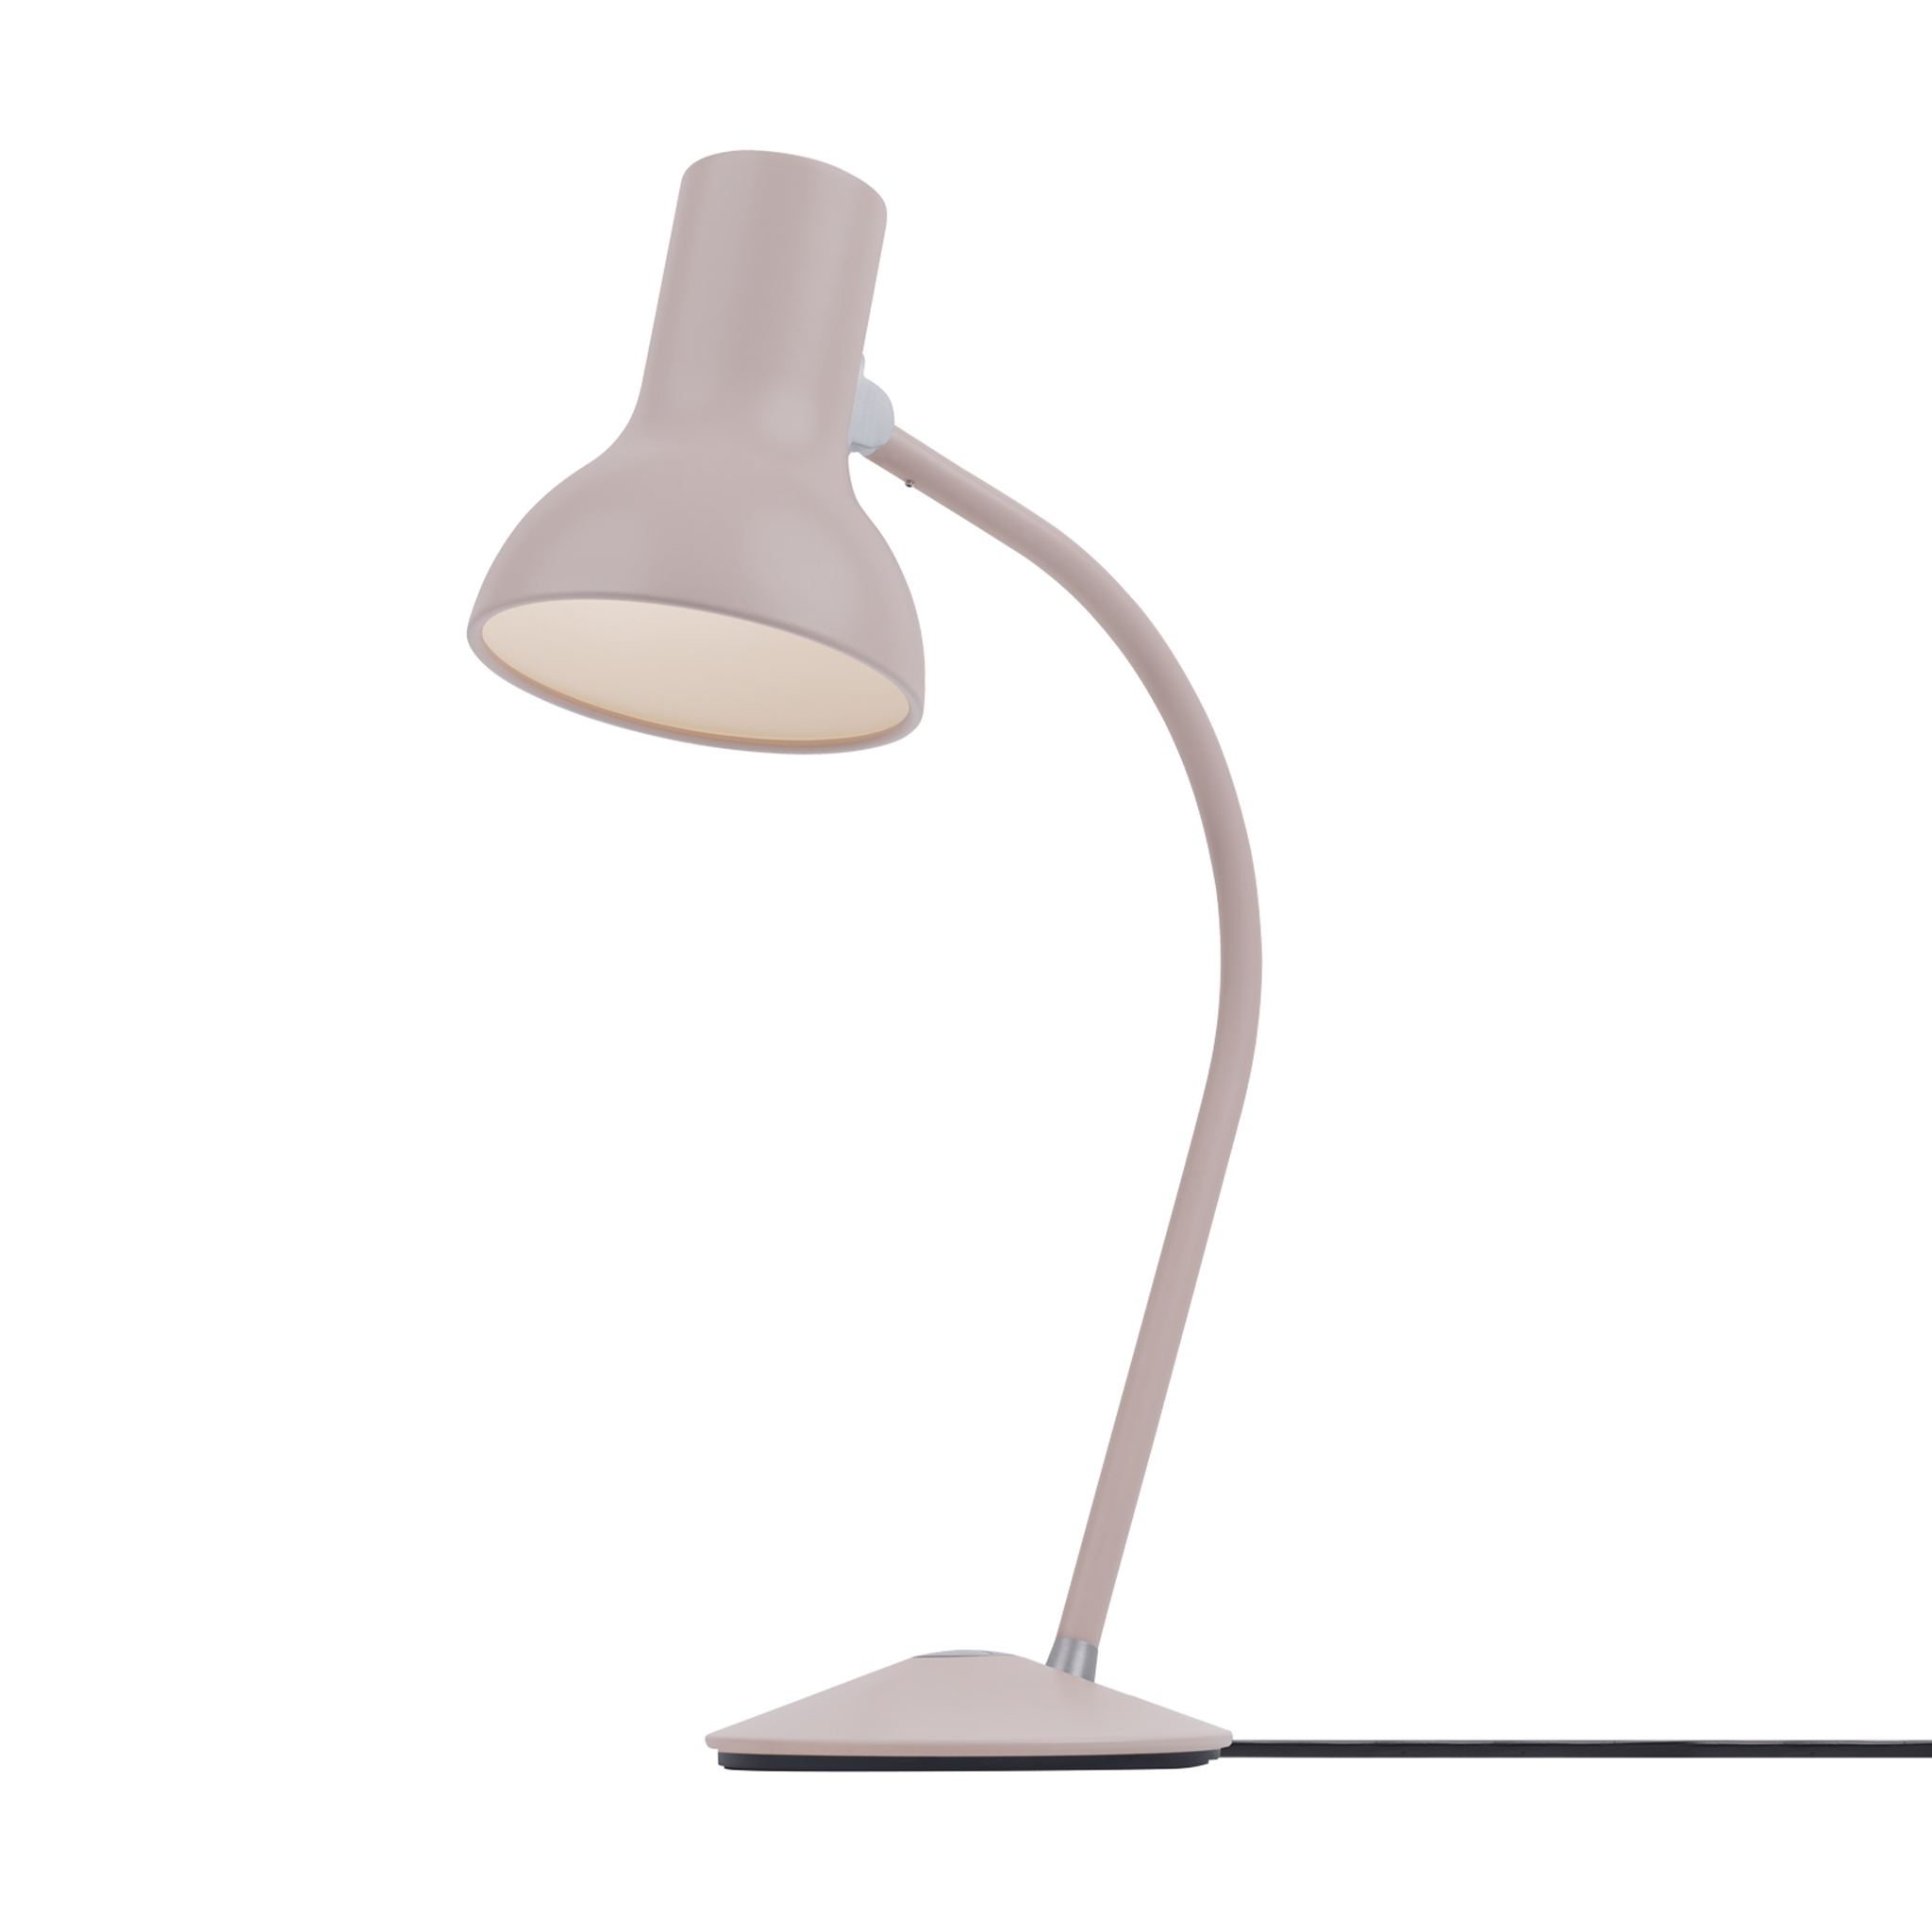 Type 75 Mini Table Lamp by Anglepoise